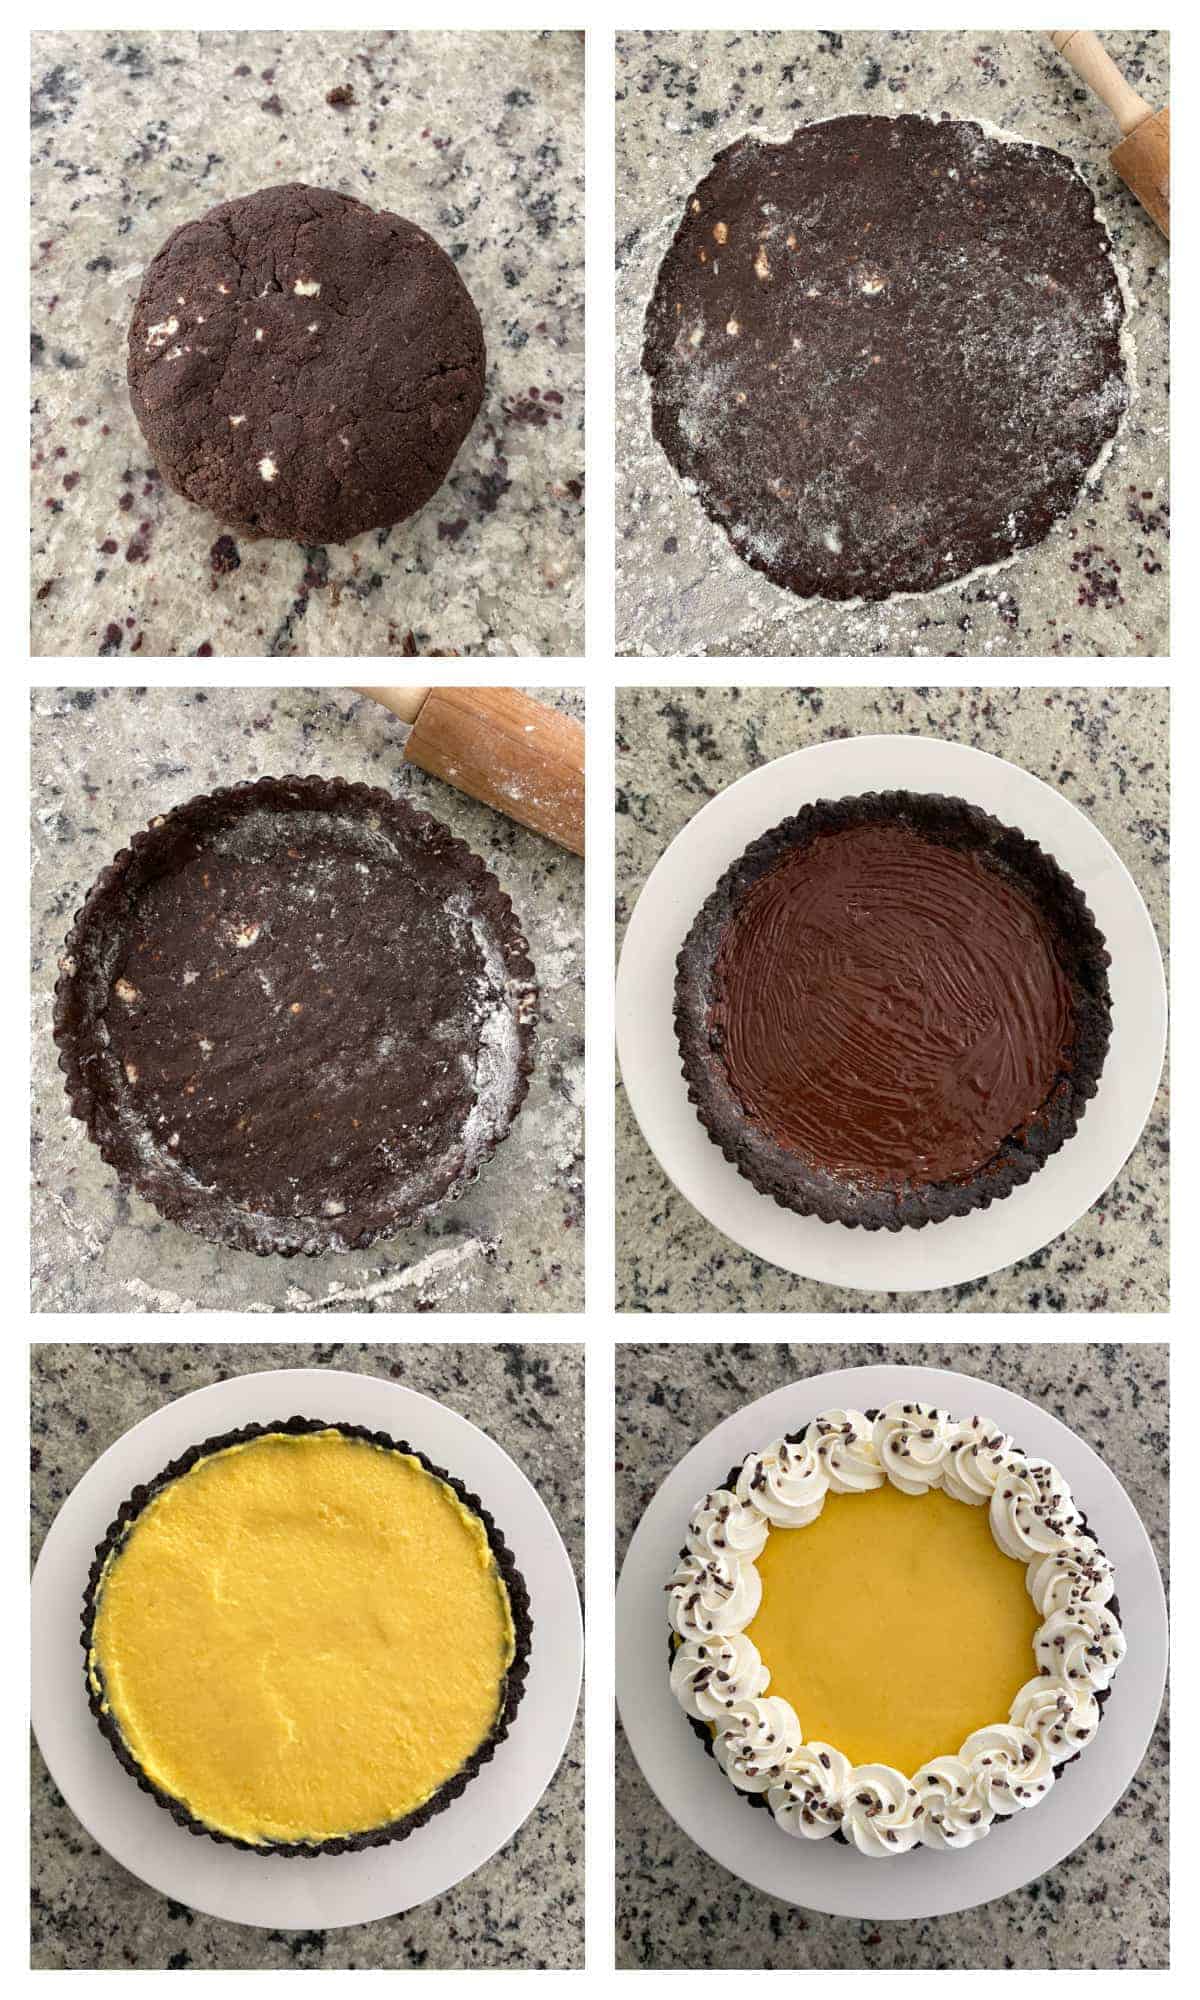 Collage showing the steps to making a Chocolate Mango Tart from rolling out the dough, the unbaked crust, baked crust with melted chocolate spread inside, crust filled with mango curd, and finally the completed tart